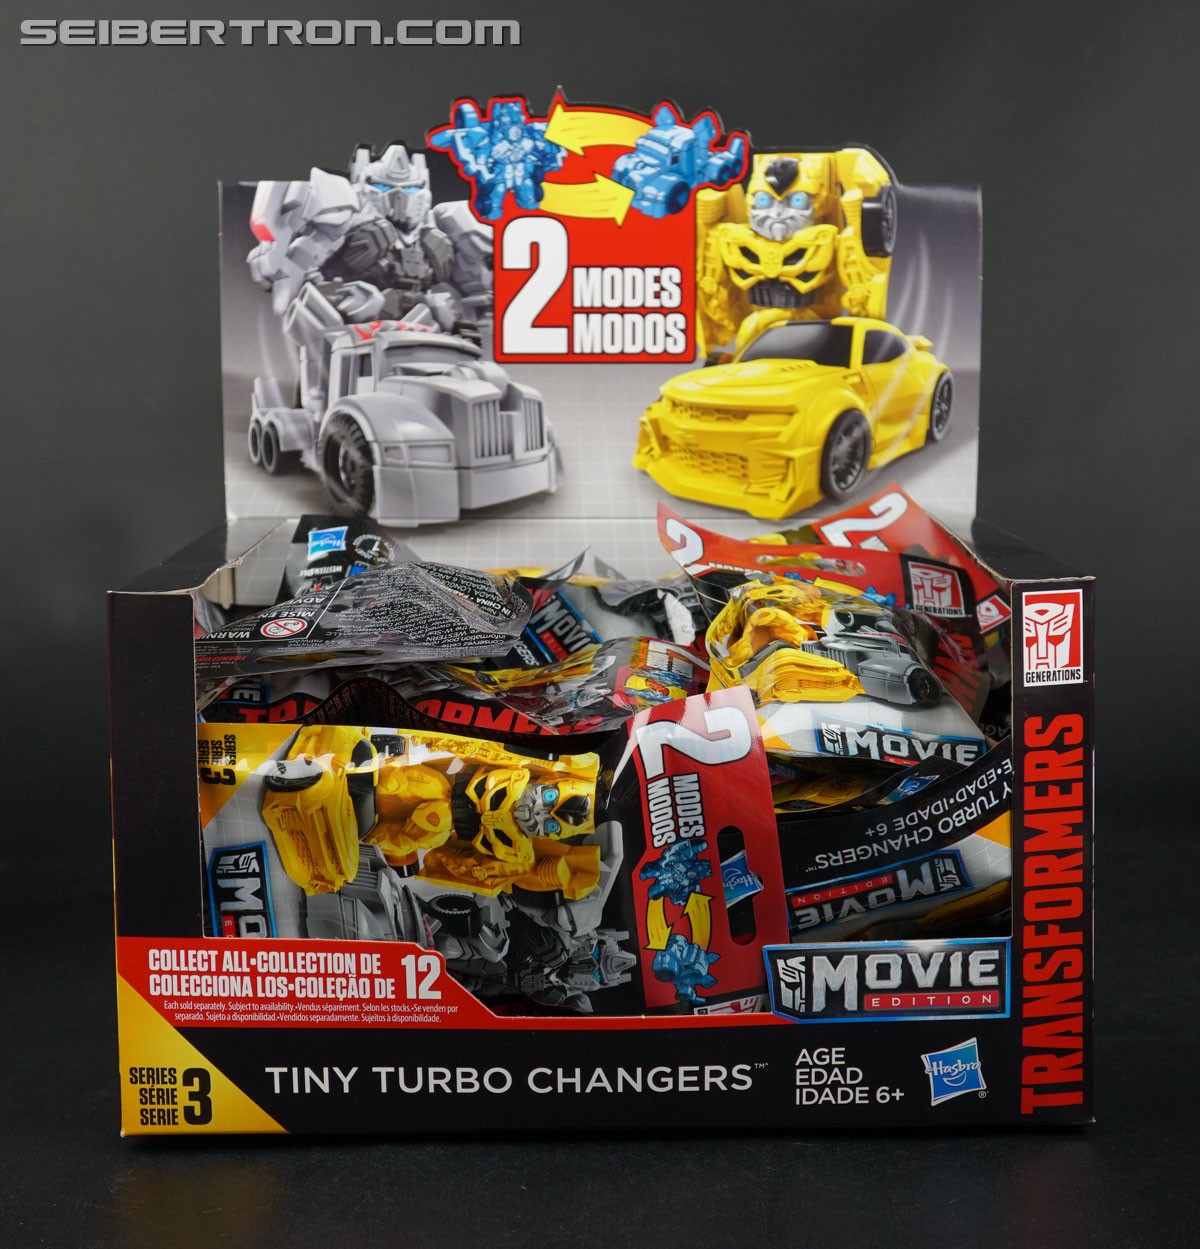 Transformers News: Transformers Tiny Titans Series 3 Packaging and Codes to Tell Which Figure is in Each Pack!